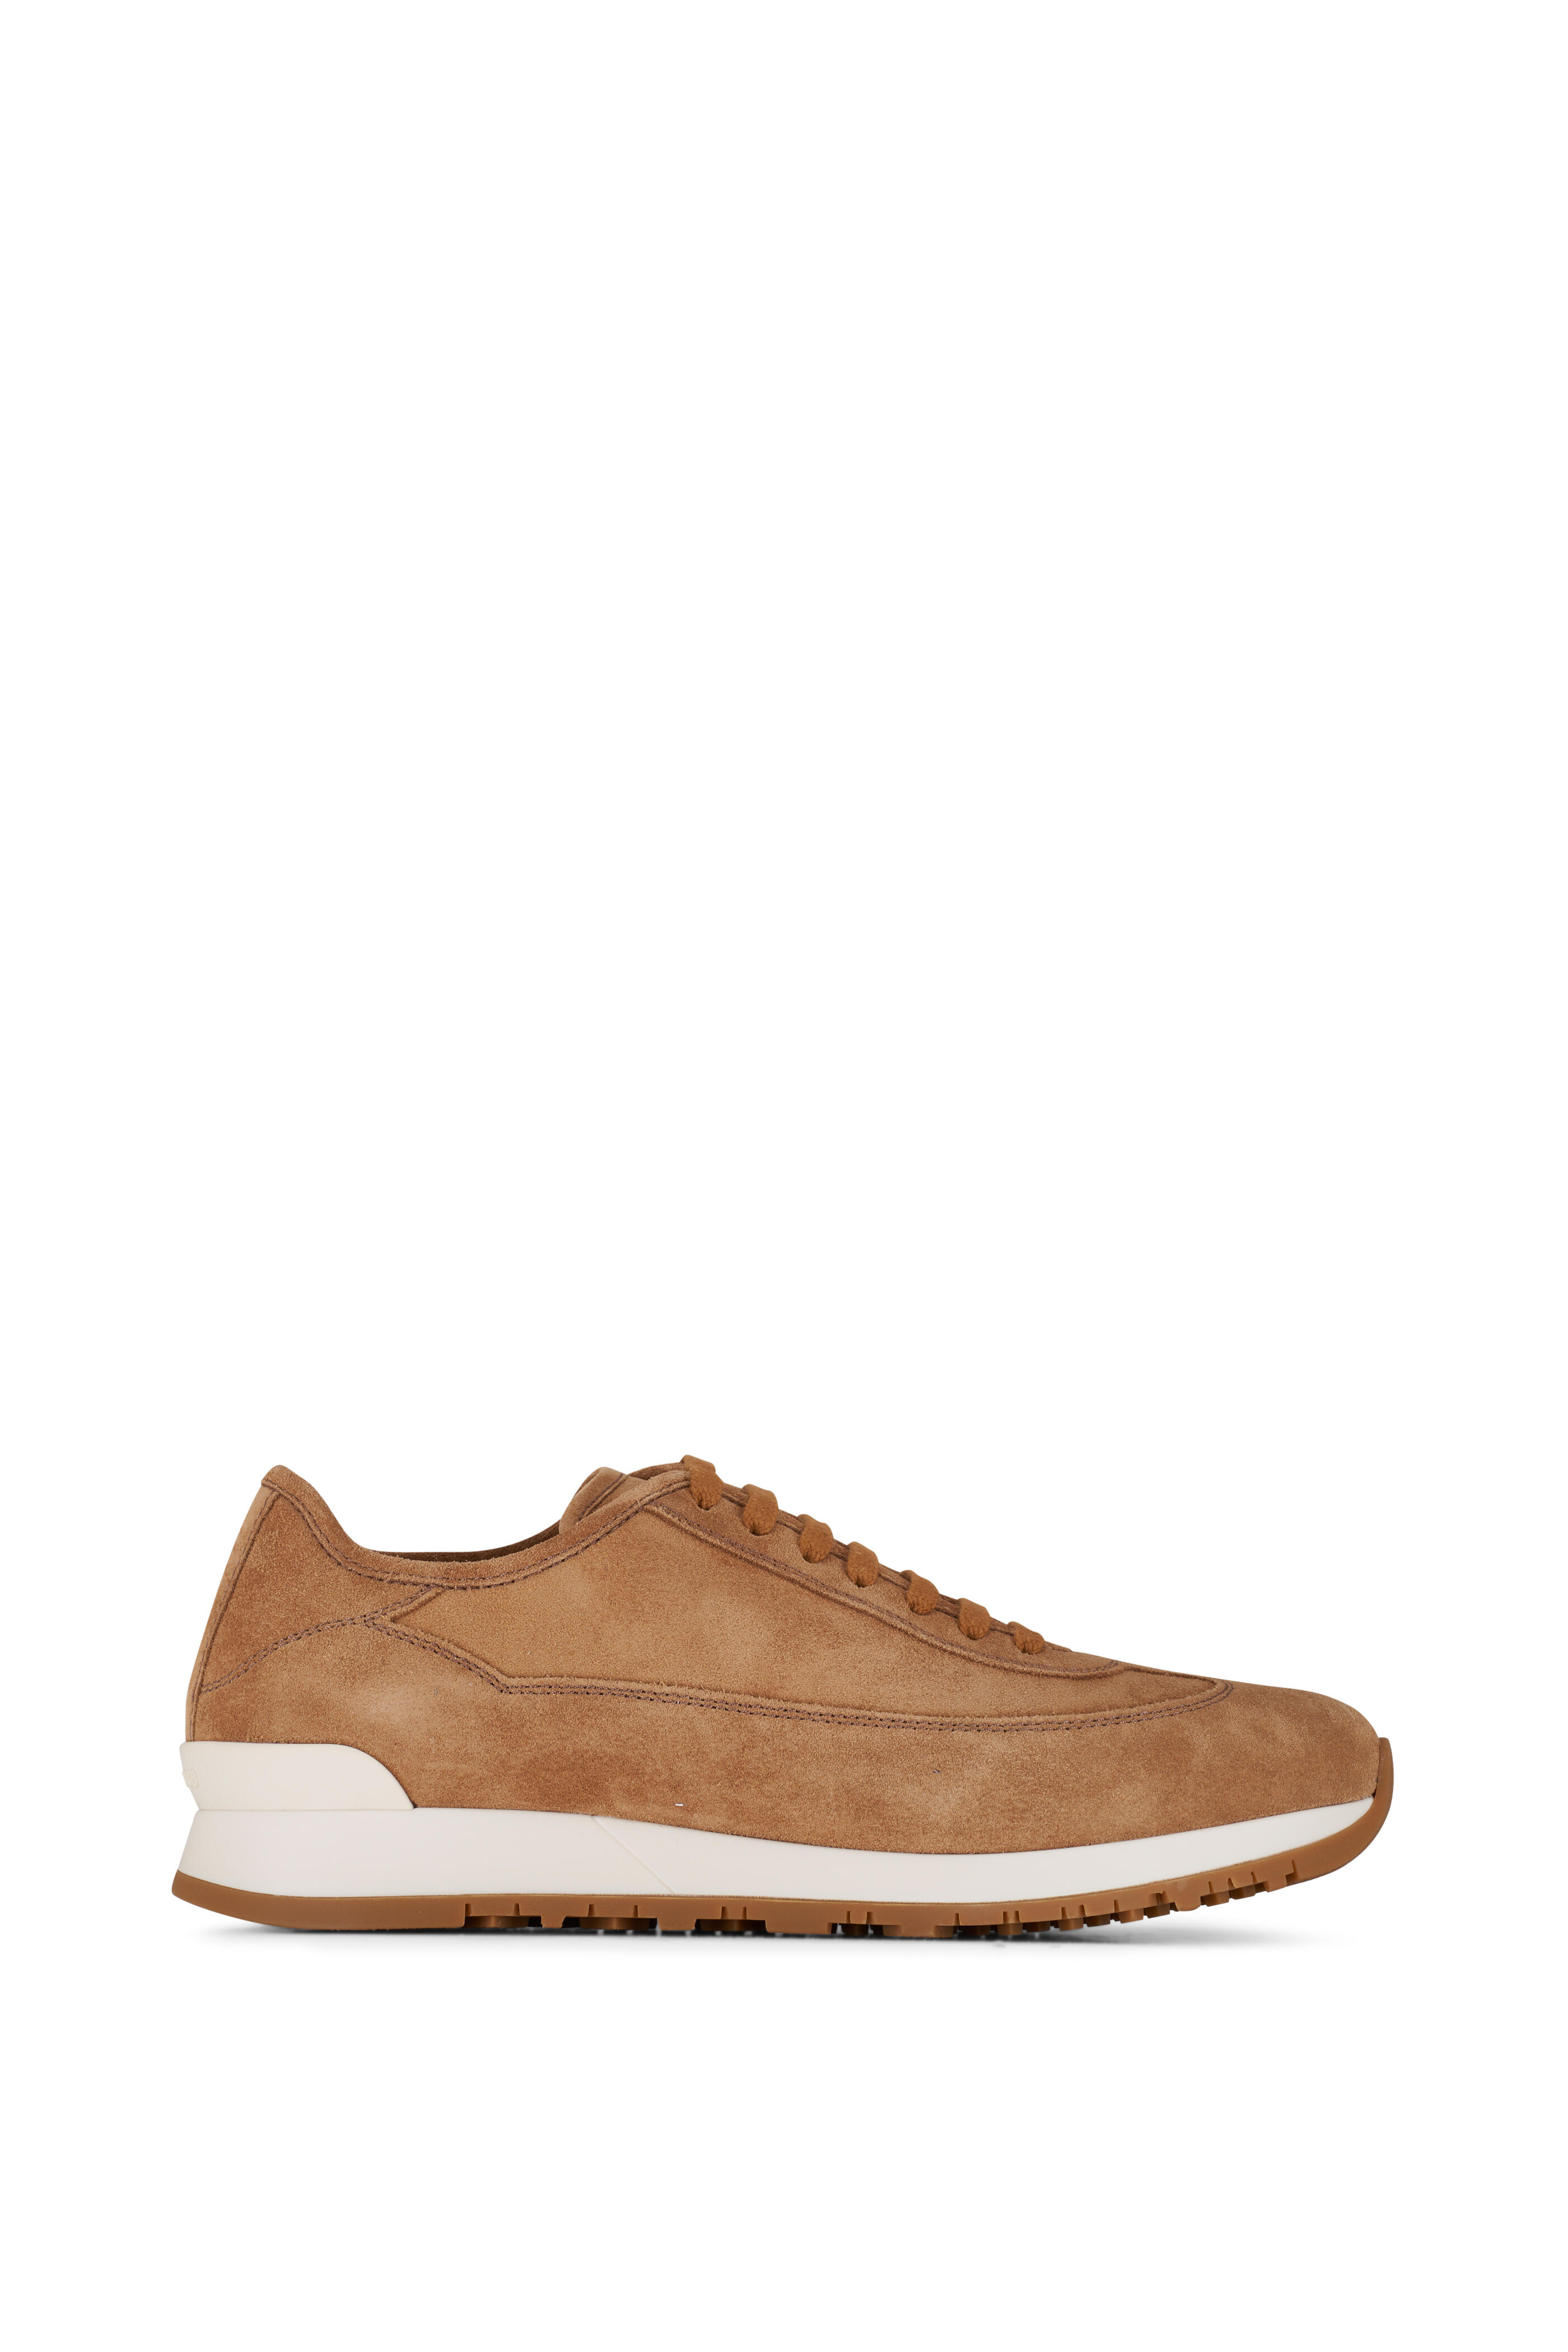 John Lobb - Foundry II Cider Suede Sneaker | Mitchell Stores